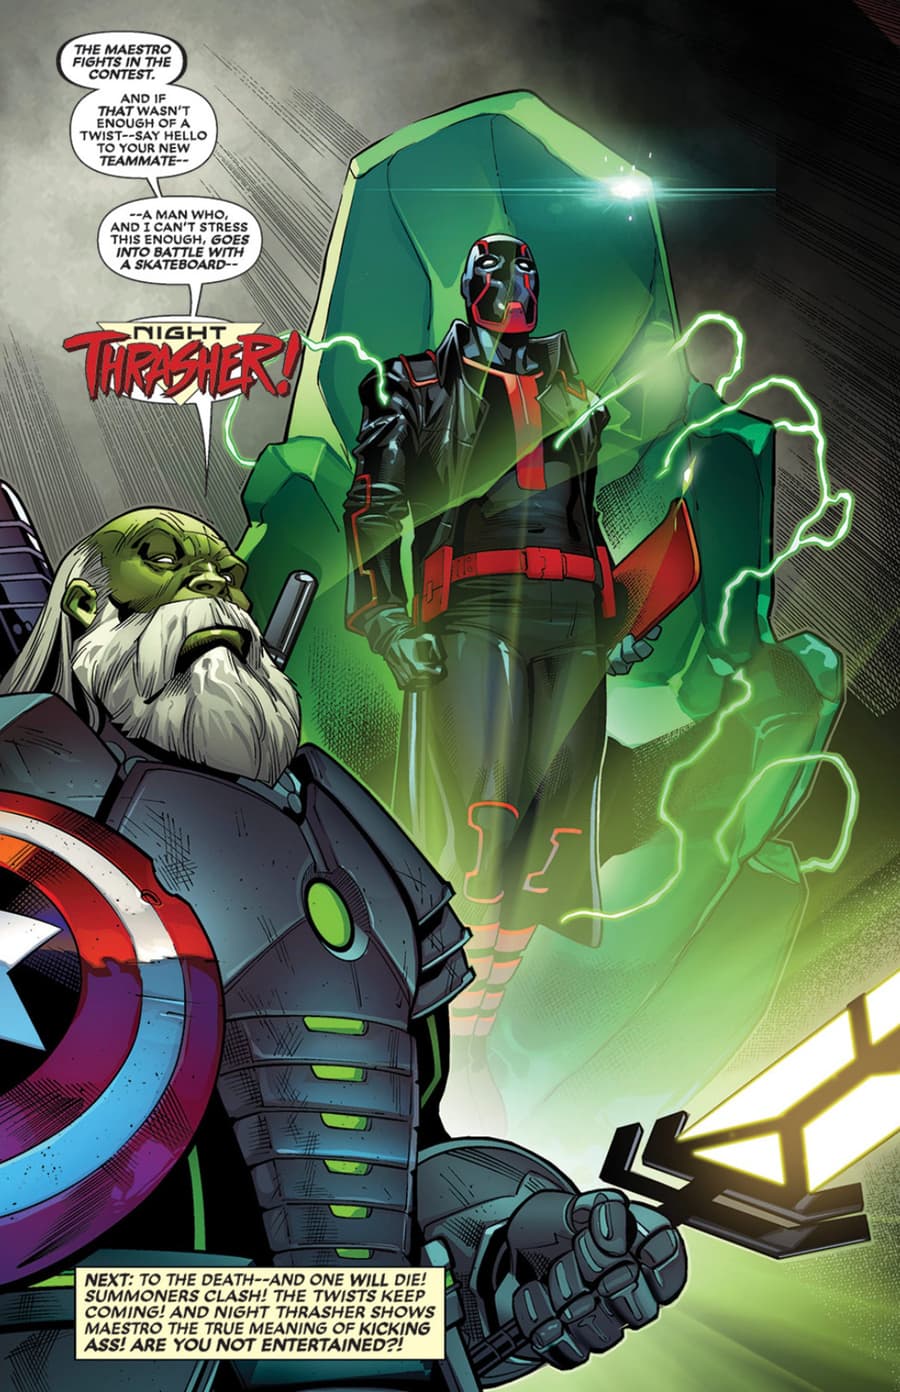 CONTEST OF CHAMPIONS (2015) #4 page by Al Ewing, Paco Medina, and Juan Vlasco